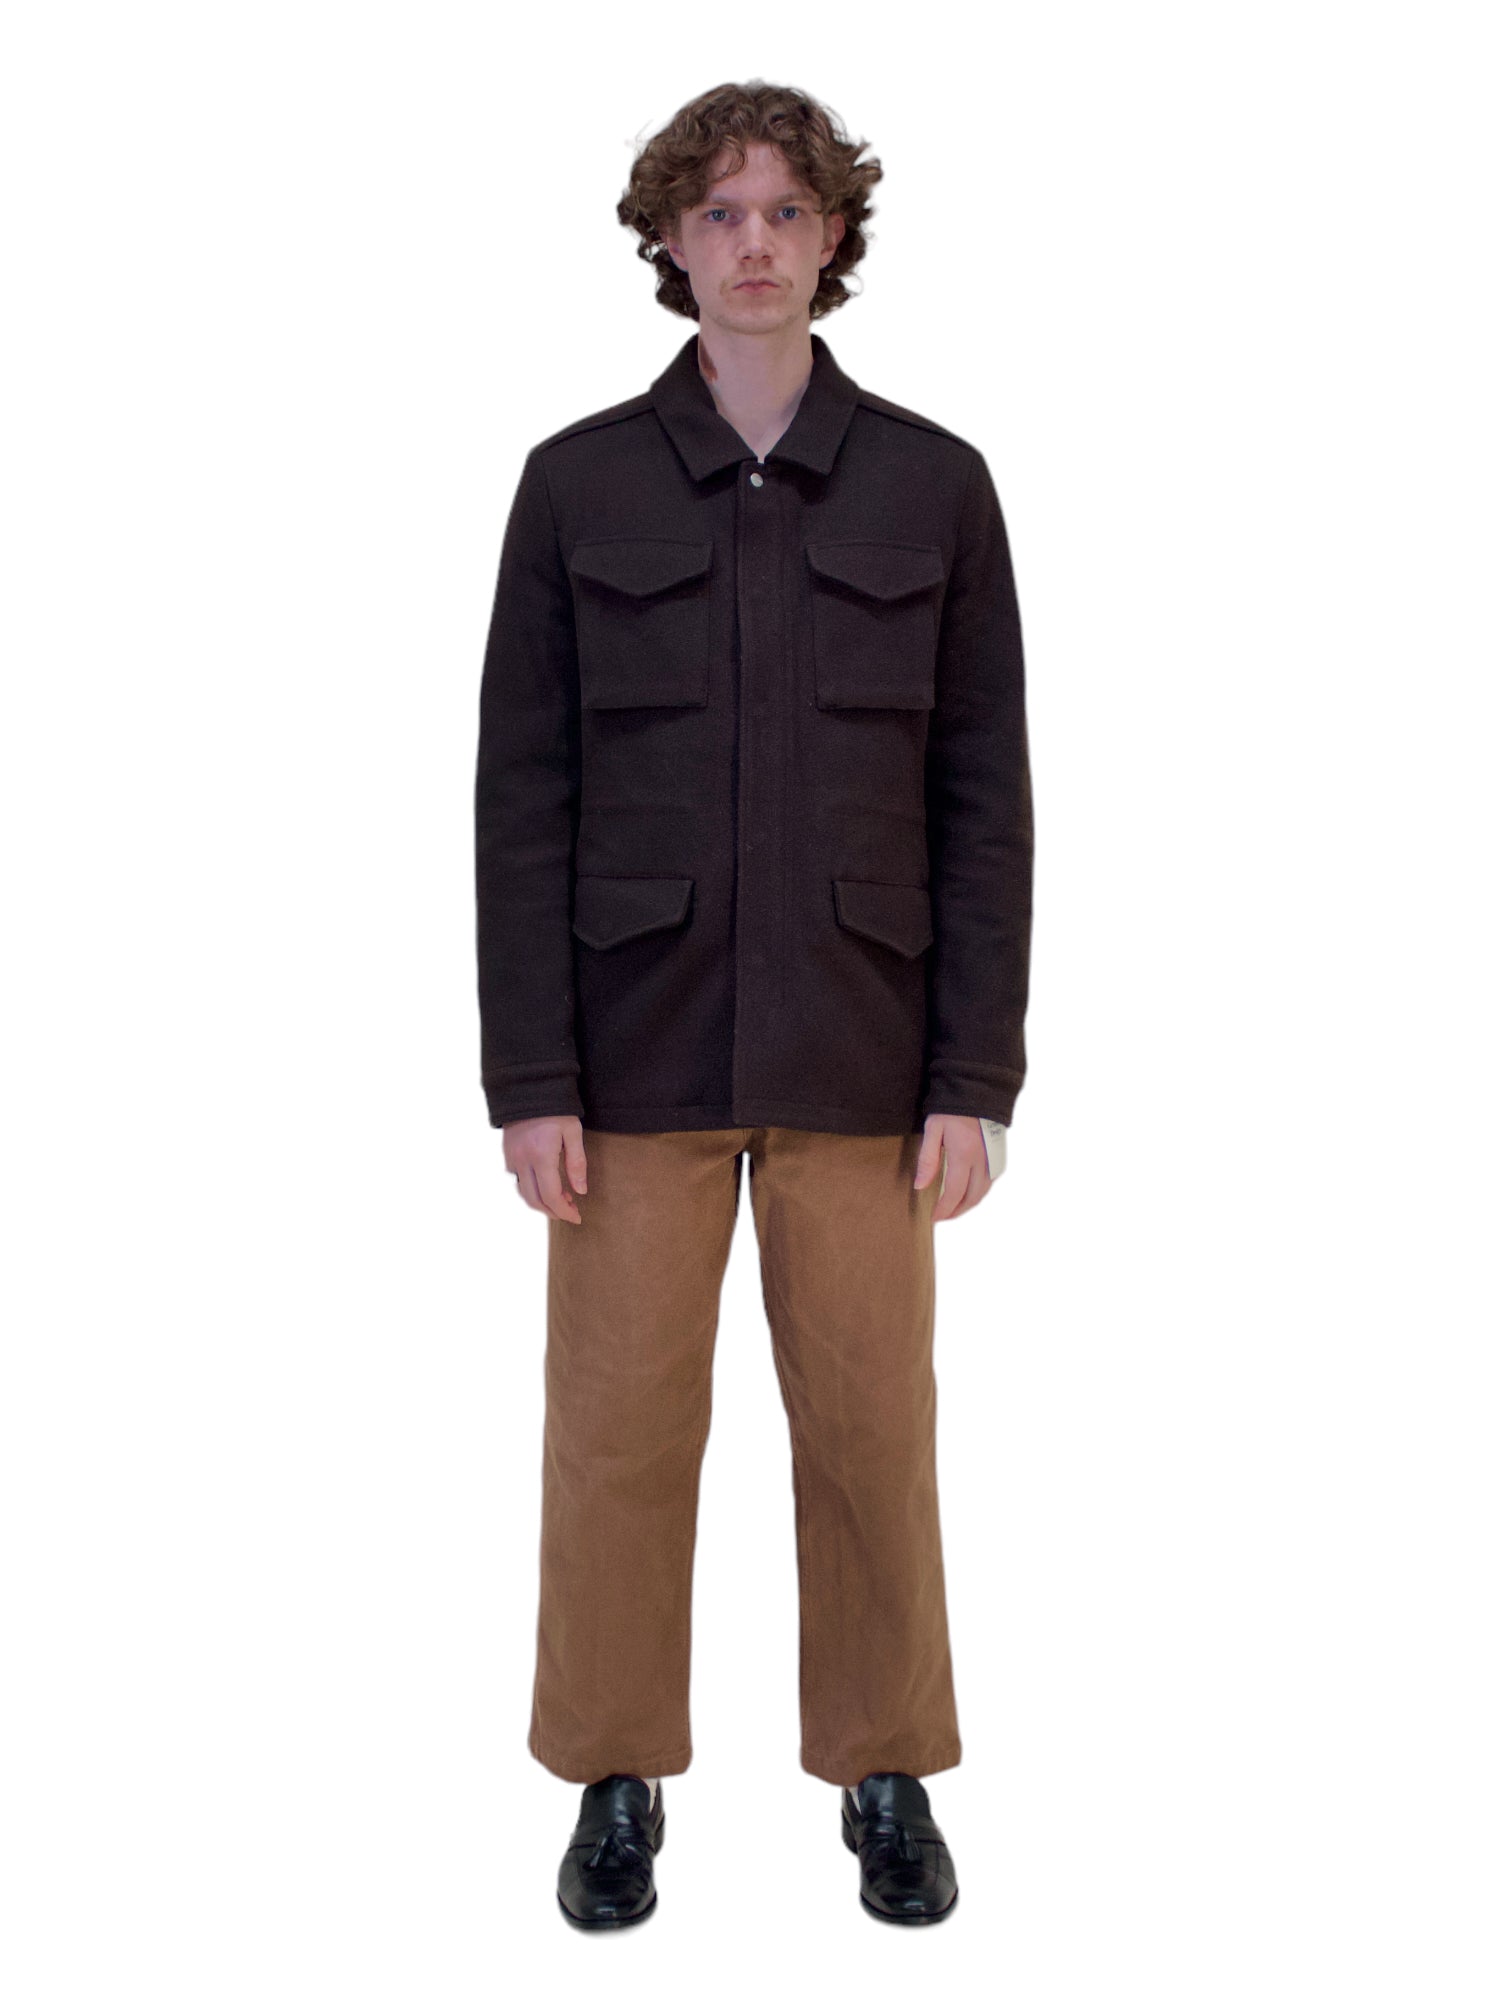 All Saints Brown Kadleston Wool-Blend Coat - Genuine Design Luxury Consignment for Men. New & Pre-Owned Clothing, Shoes, & Accessories. Calgary, Canada